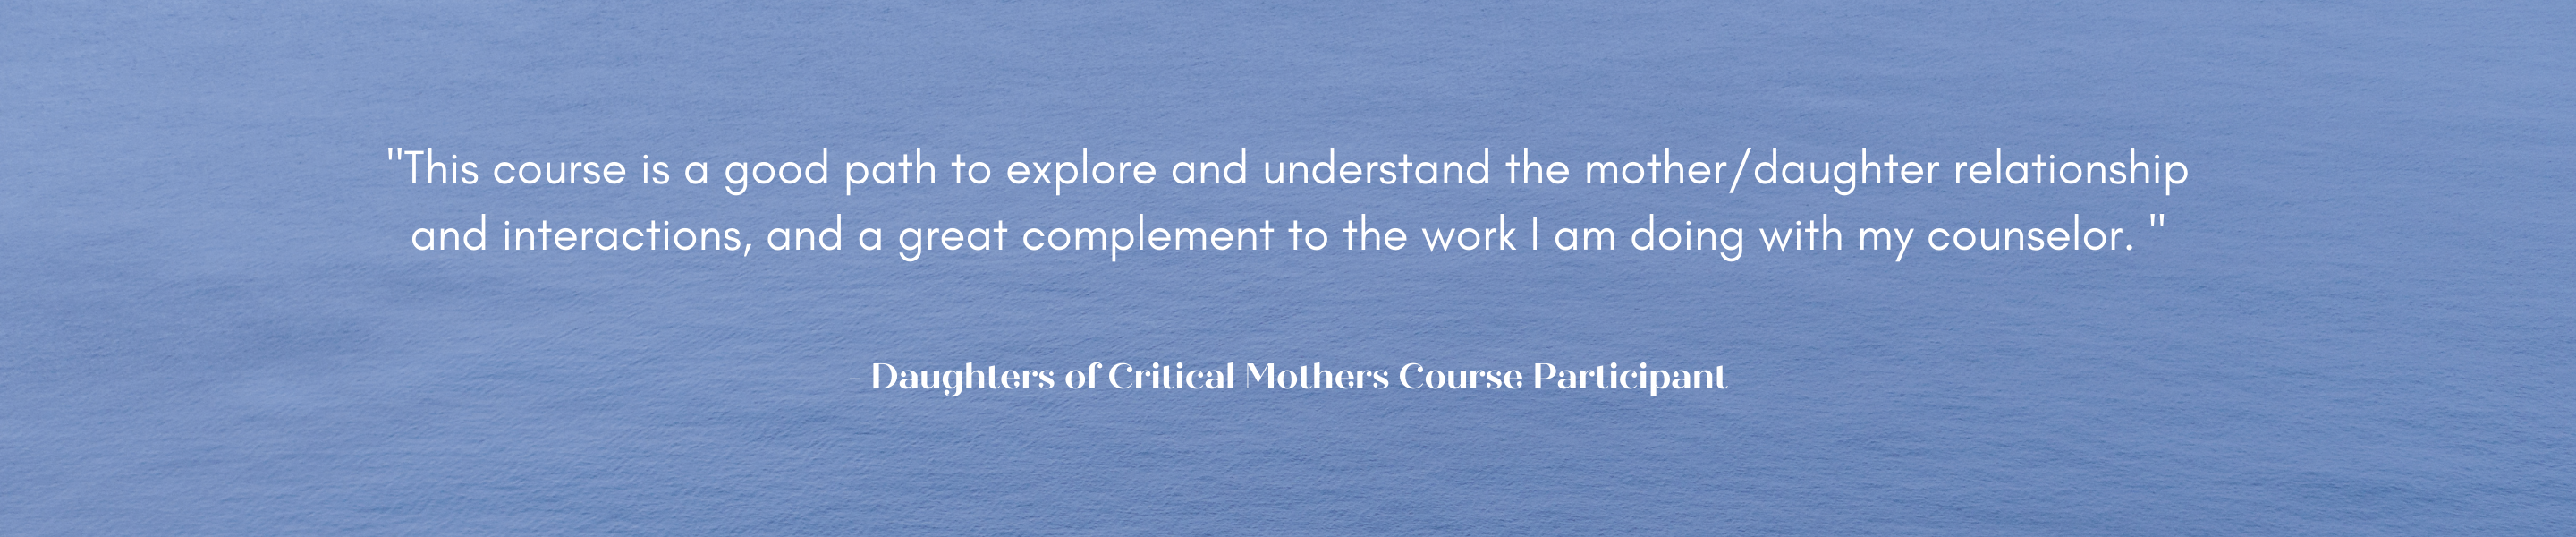 "This course is a good path to explore and understand the mother/daughter relationship and interactions, and a great complement to the work I am doing with my counselor. "